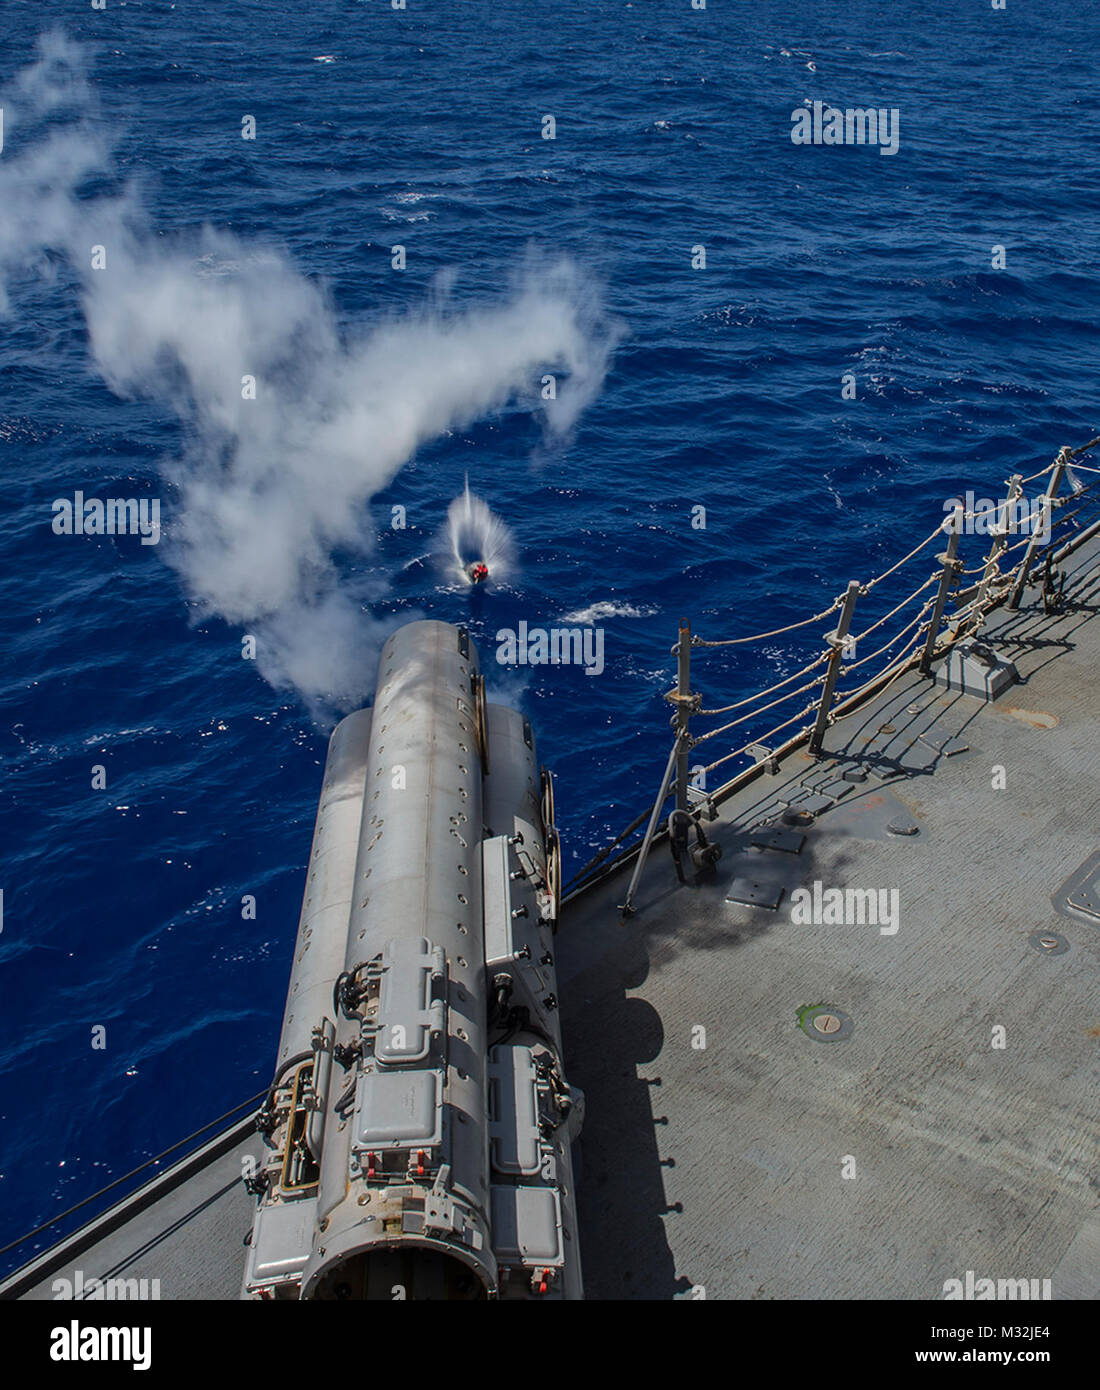 WATERS NEAR GUAM (Mar. 07, 2016) The Arleigh Burke-Class guided-missile destroyer USS McCampbell (DDG-85) fires an MK-54 exercise torpedo (EXTORP) over the port side during an anti-submarine warfare (ASW) event as part of MULTI SAIL 2016. MULTI SAIL is a bilateral training exercise aimed at interoperability between the U.S. and Japanese forces. This exercise builds interoperability and benefits from realistic, shared training, enhancing our ability to work together to confront any contingency. McCampbell is on patrol in the 7th fleet of operations in support of security and stability in the In Stock Photo